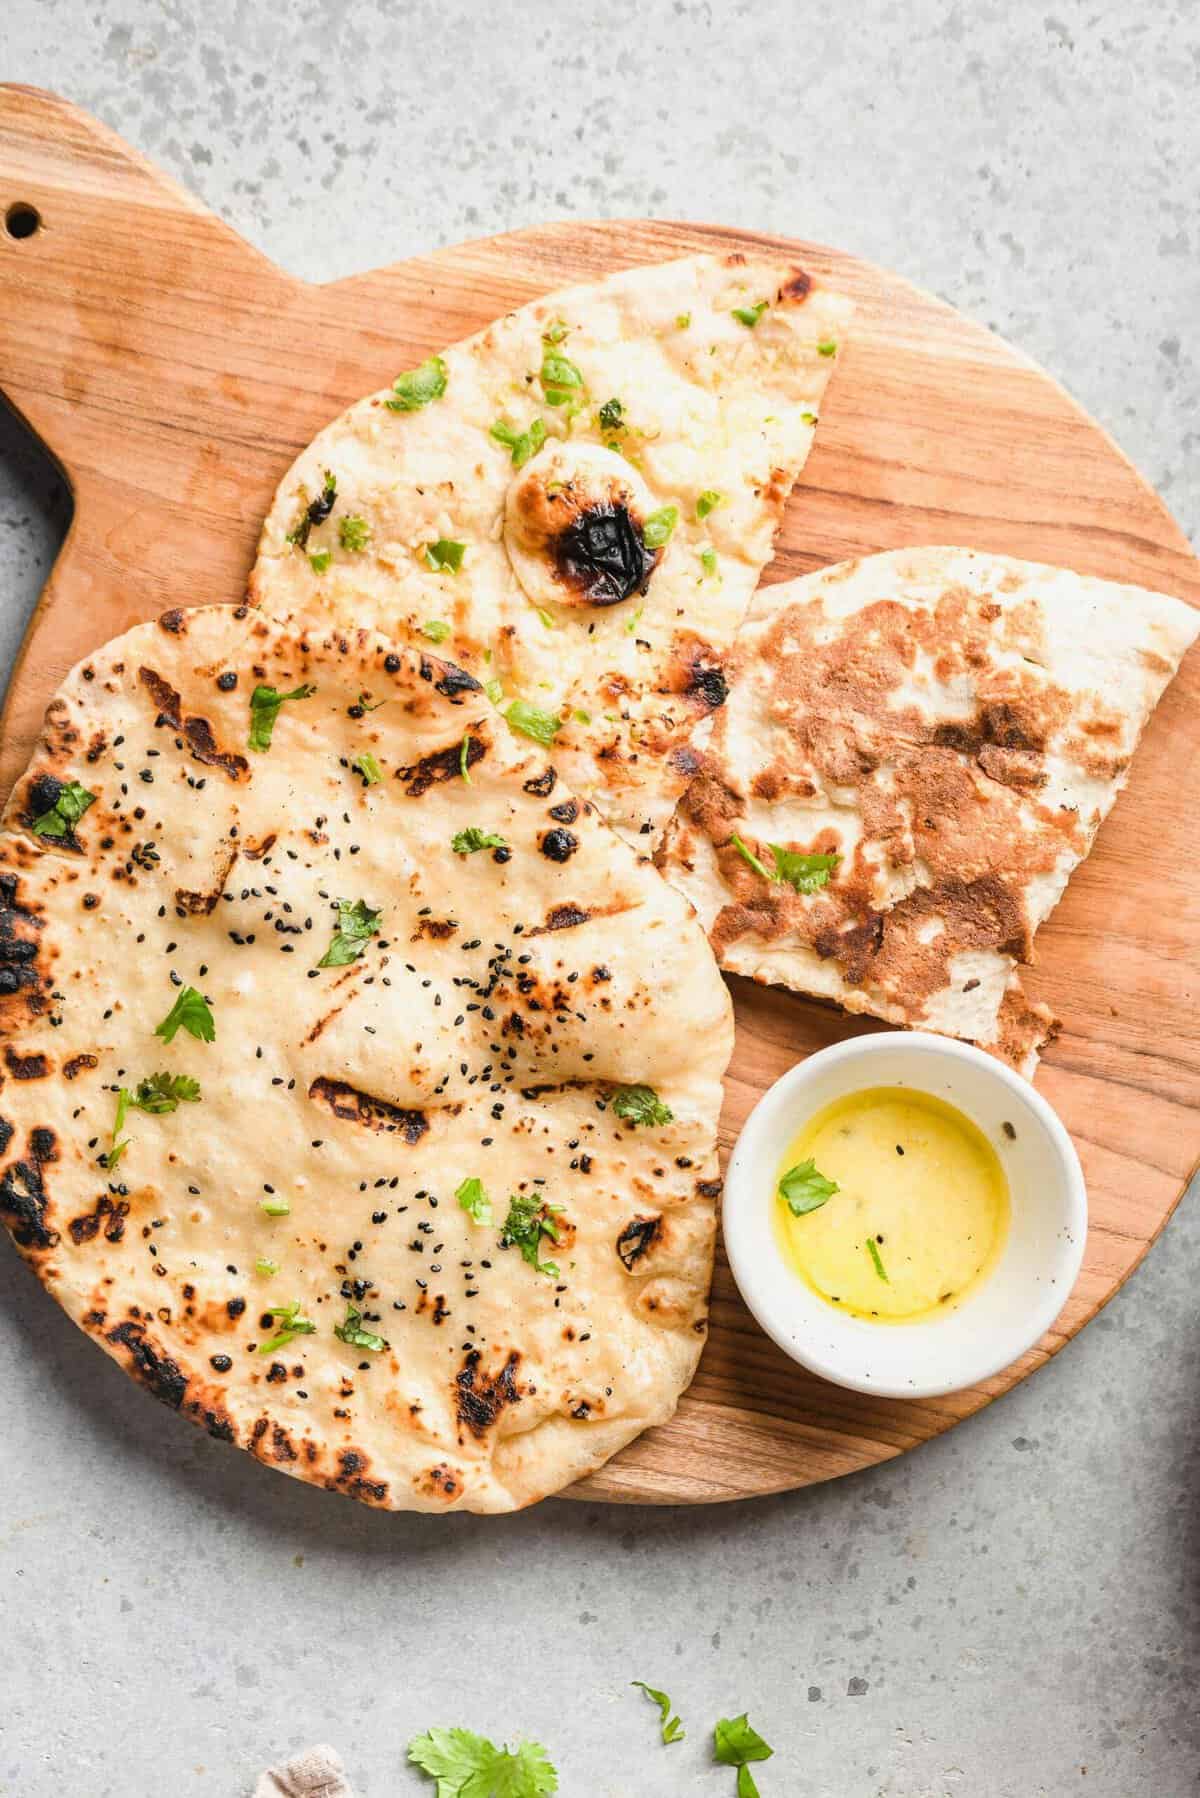 Naan is presented on a wooden cutting board. 